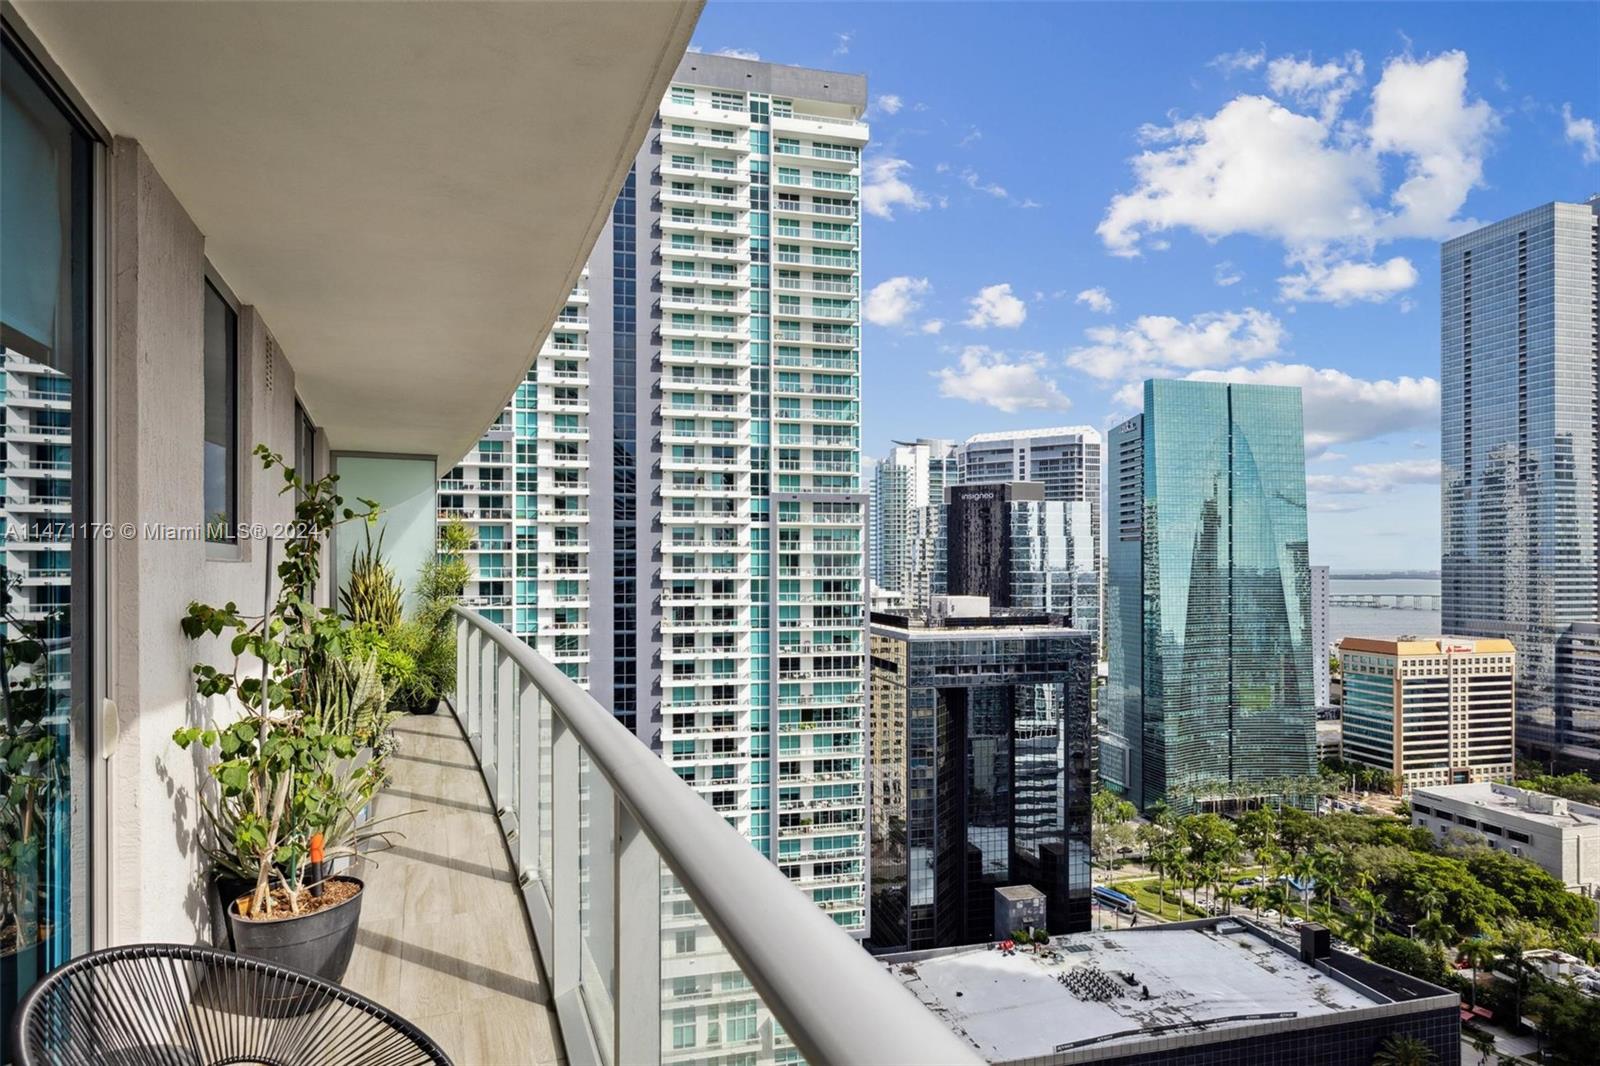 Beautiful 2 bed / 2 bath residence at Millecento offers the essence of luxury living in the vibrant Brickell neighborhood. Contemporary Design with open kitchen and  top-of-the-line appliances.
Spectacular views of the surrounding cityscape, providing a true sense of urban living. Located in the heart of Brickell, just steps away from the world-class shopping and dining experience at Brickell City Centre. Residents can enjoy a wide array of amenities, including a rooftop pool, library, gym, movie theater, and social room. MILLECENTO  is more than just a residence; it's a lifestyle. It's a place where you can live, work, and play, all within the vibrant atmosphere of Brickell. If you're looking for a luxurious urban experience, this property is worth considering.